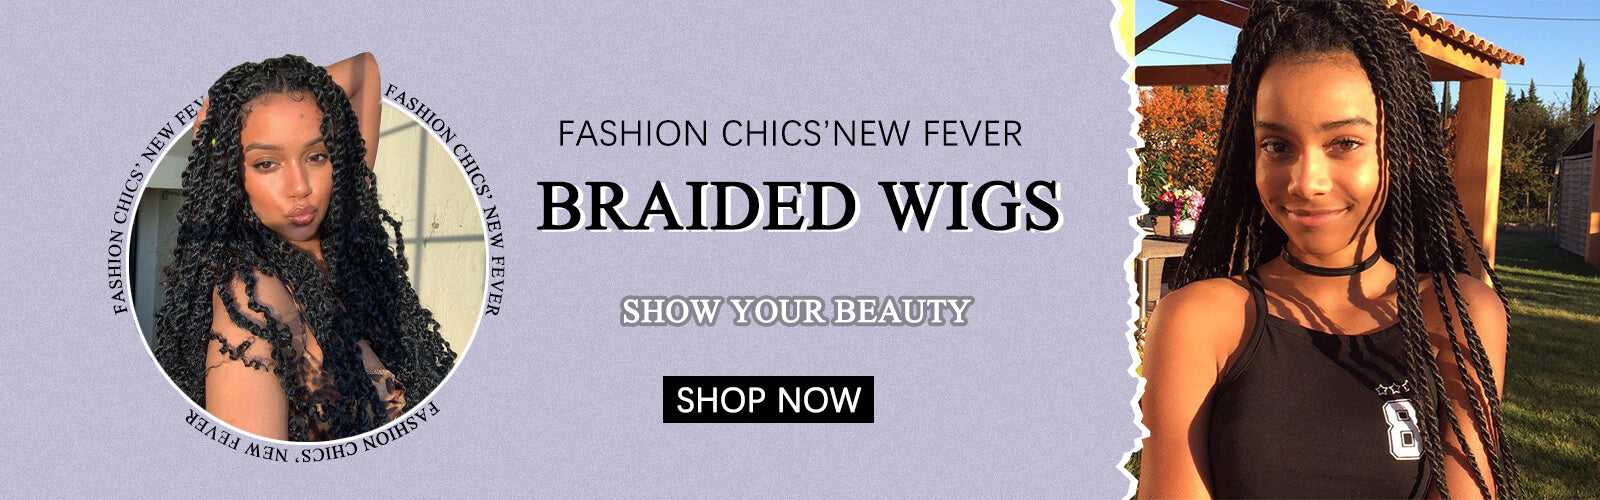 Fashion chics's new fever braided wigs